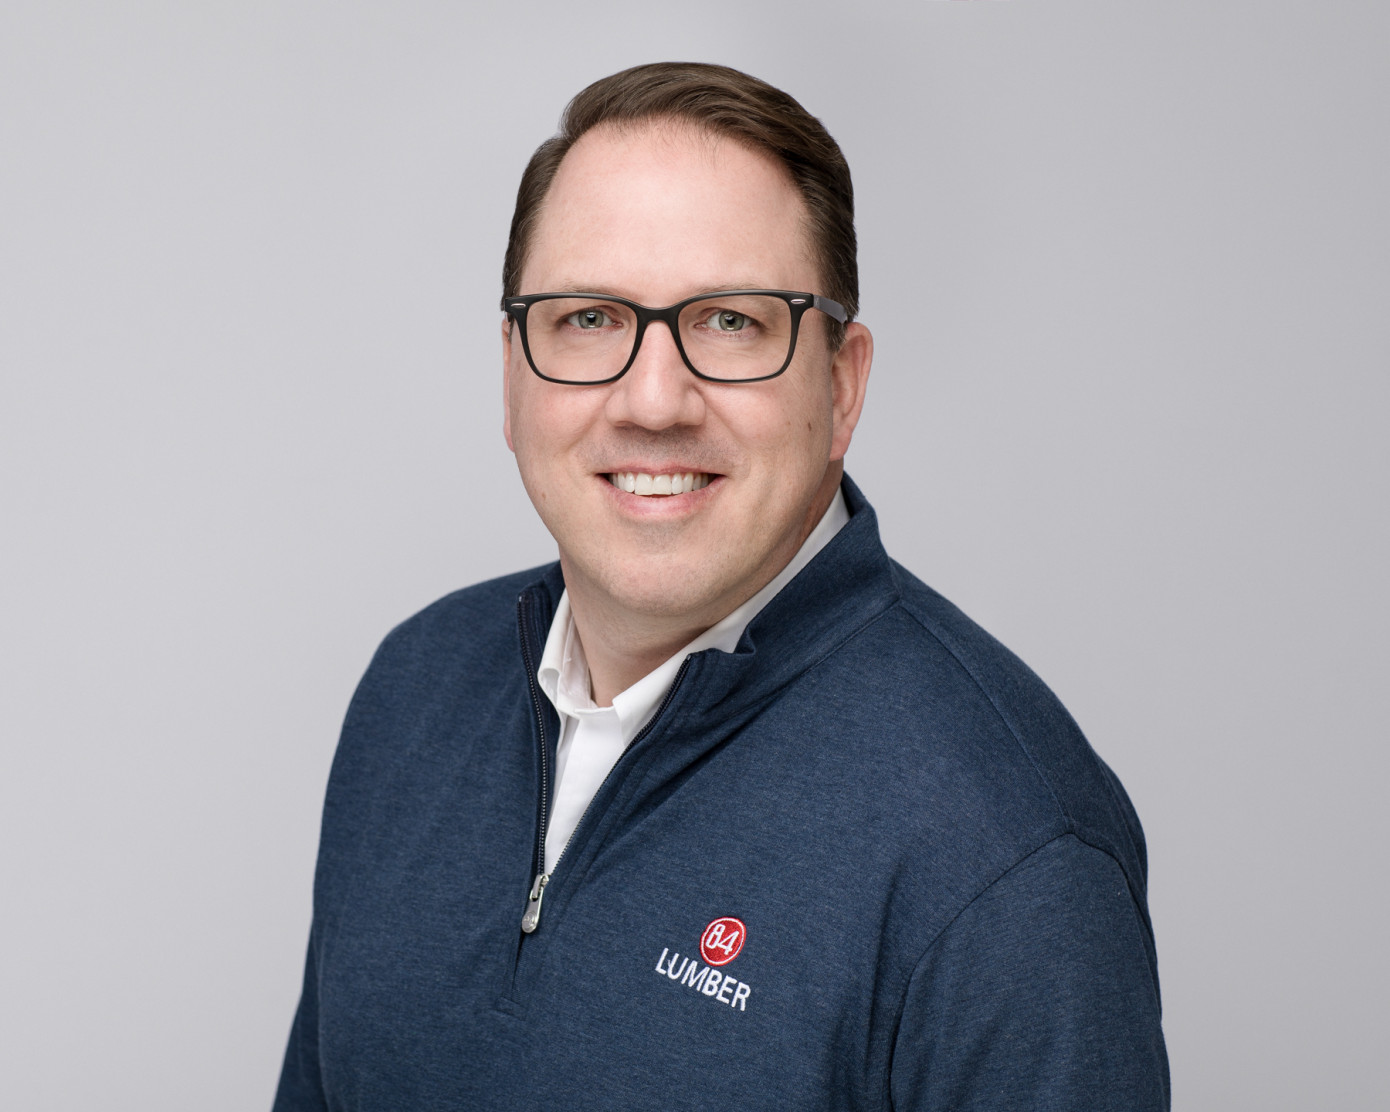 84 Lumber appoints James Abbott as Vice President of Engineered Wood Products